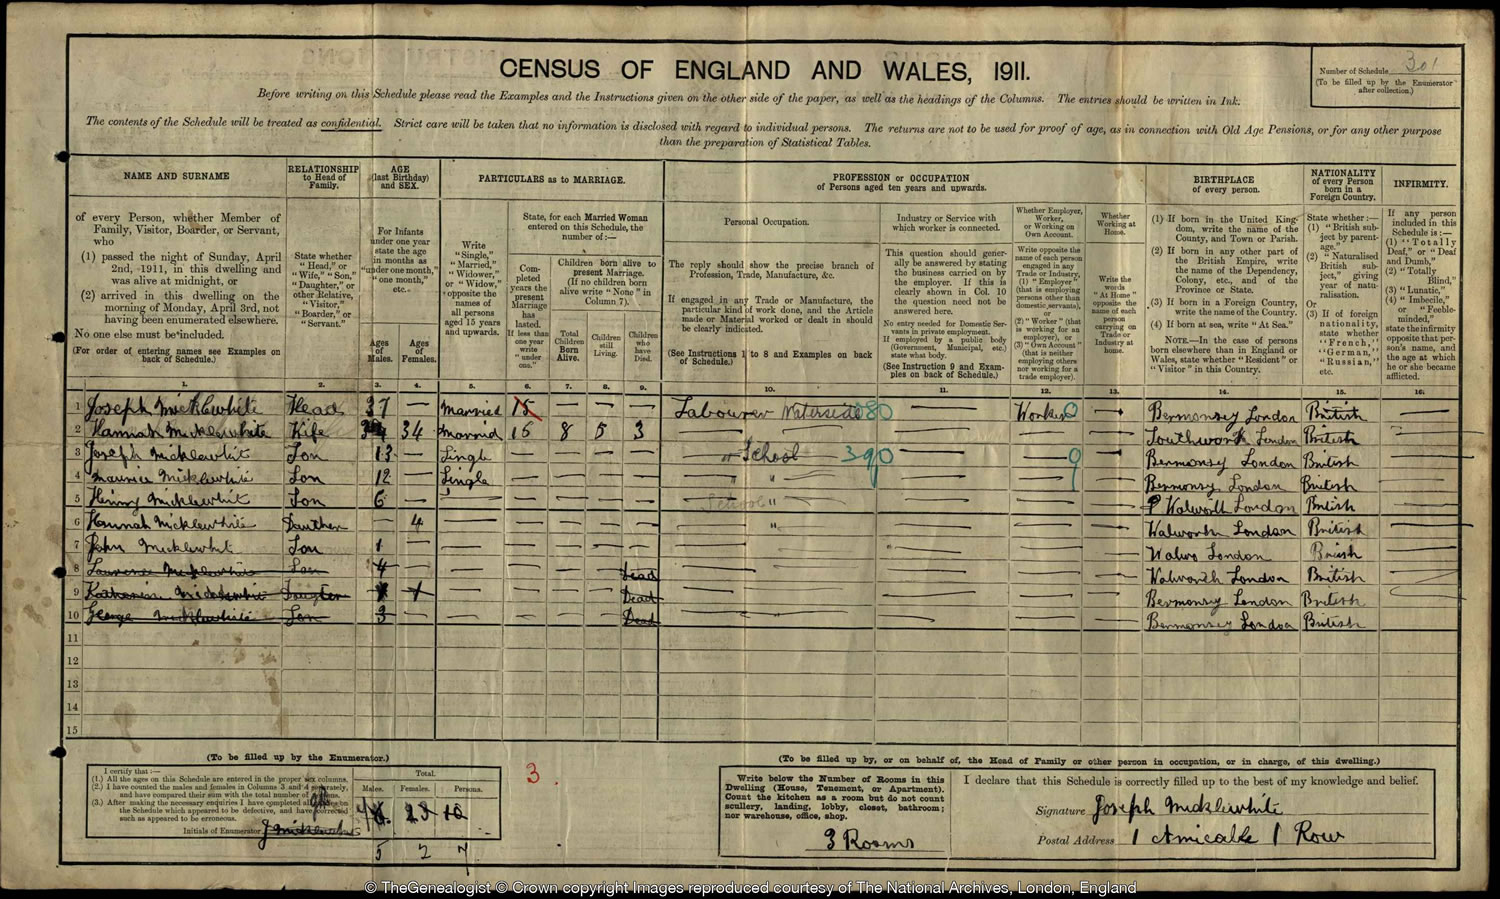 1911 census of 1 Amicable Row Southwark home of the Micklewhite family